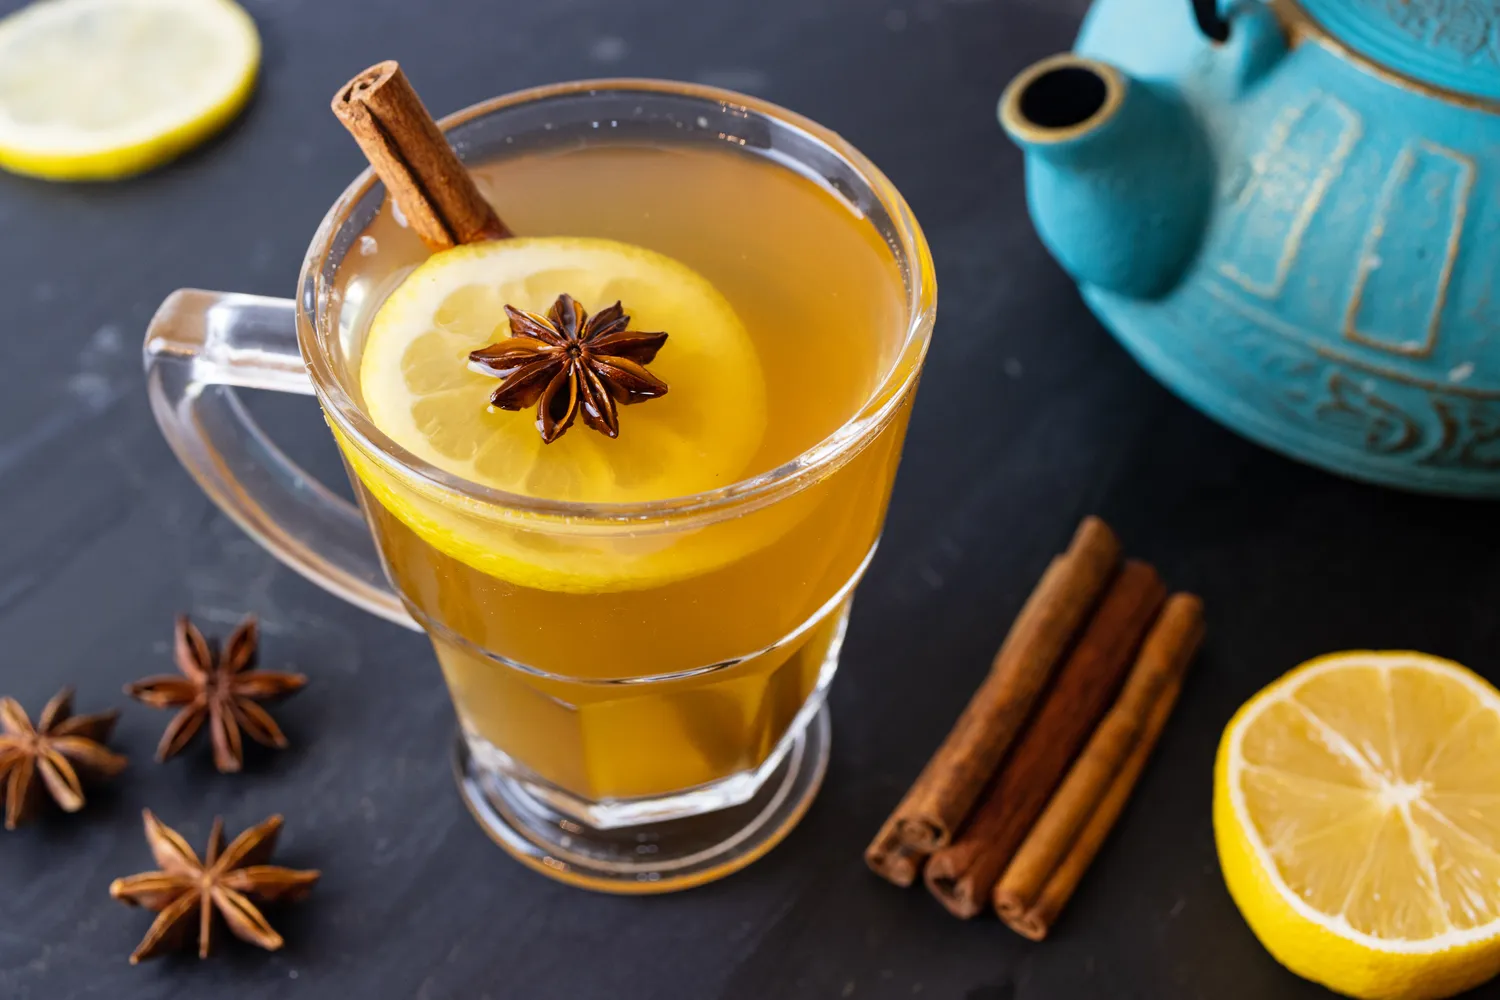 Healthy Hot Toddy 17 1 of 1 BL